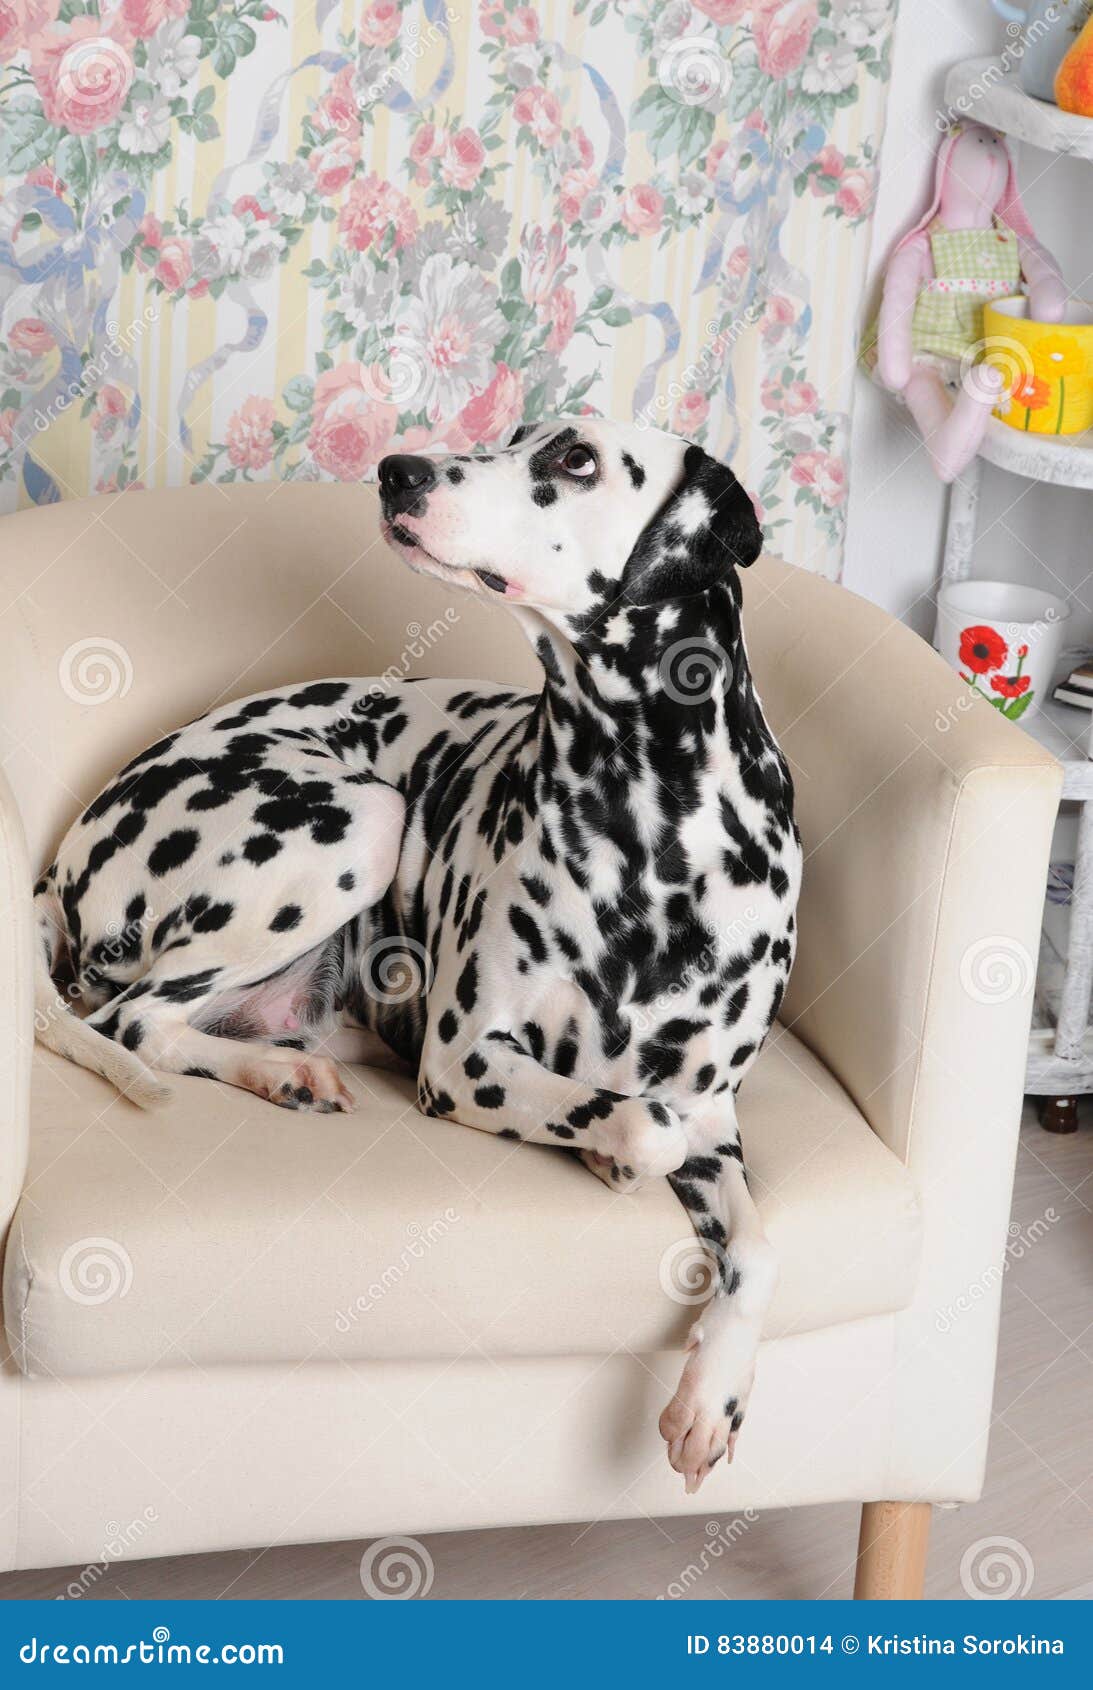 Dalmatian Dog On A White Chair In The Bright Shabby Interior